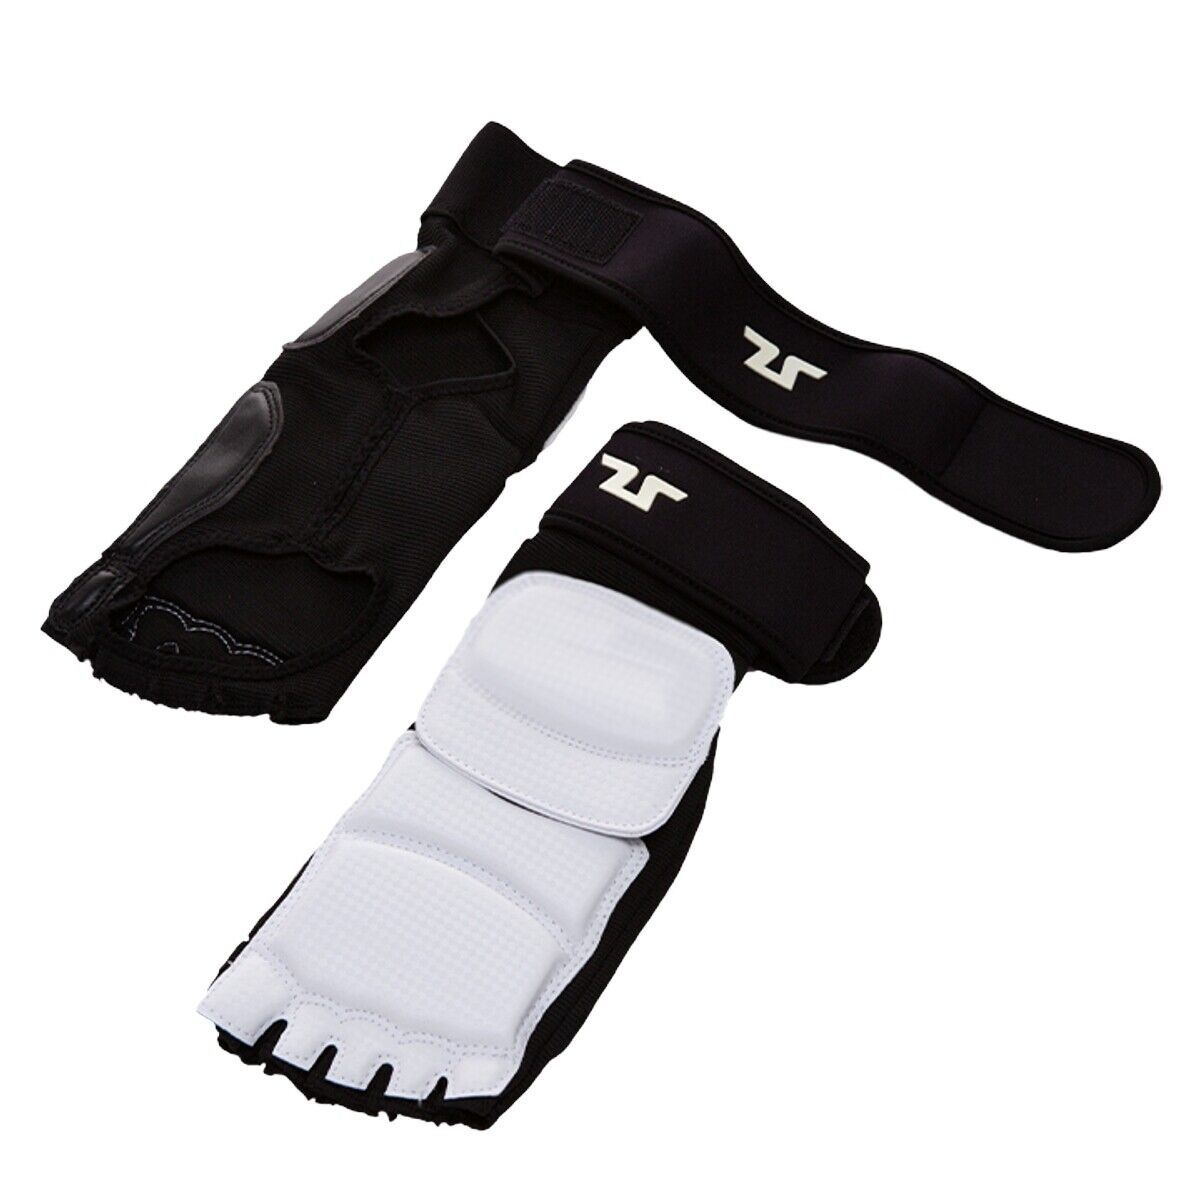 Tusah WT Approved Foot Socks Instep Guards